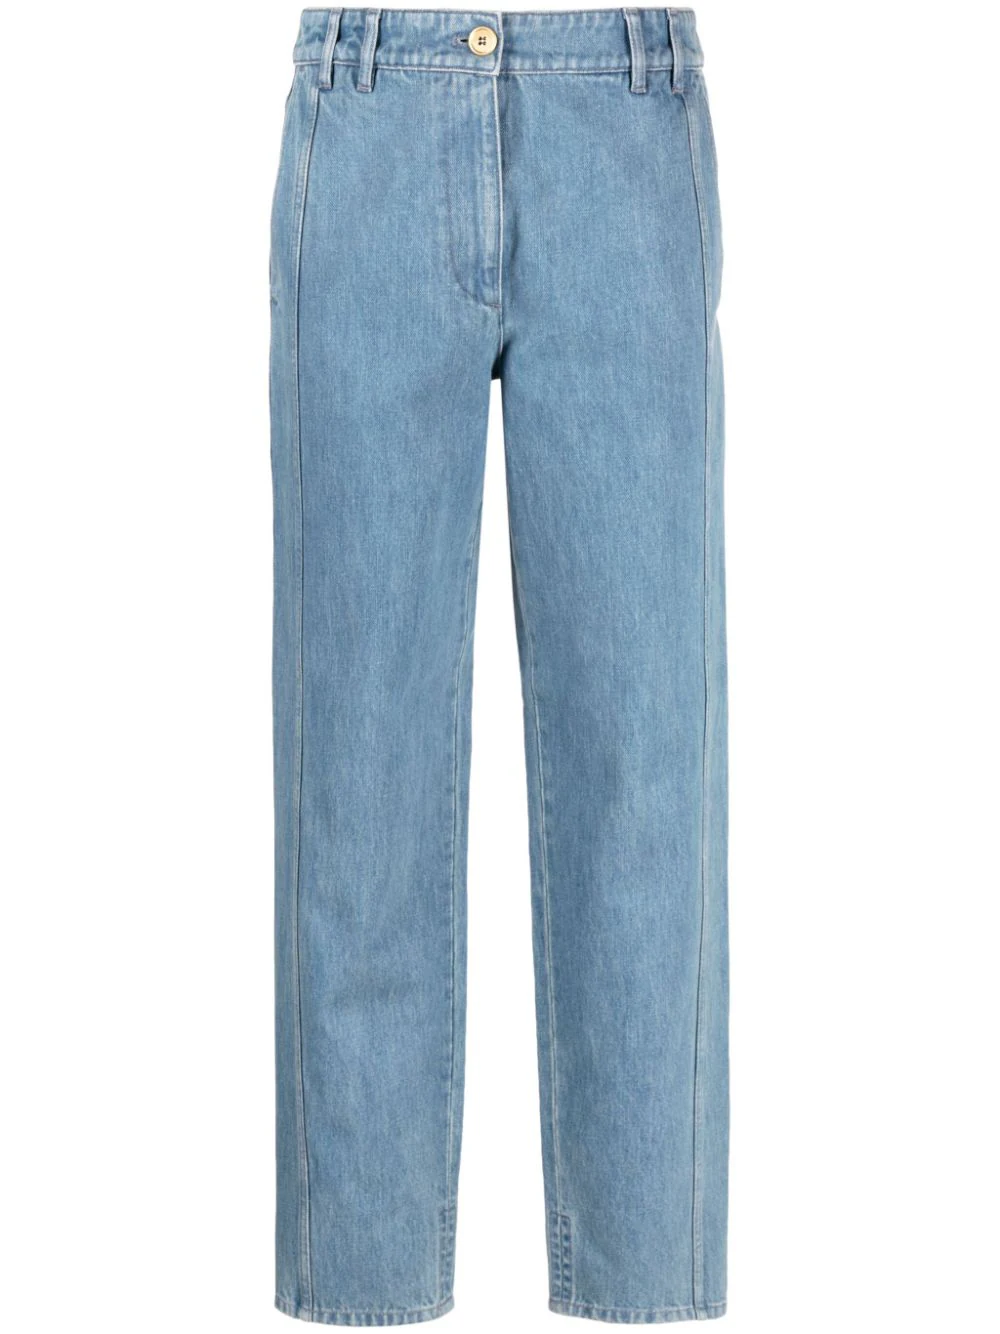 PATOU STRAIGHT JEANS WITH EMBROIDERY